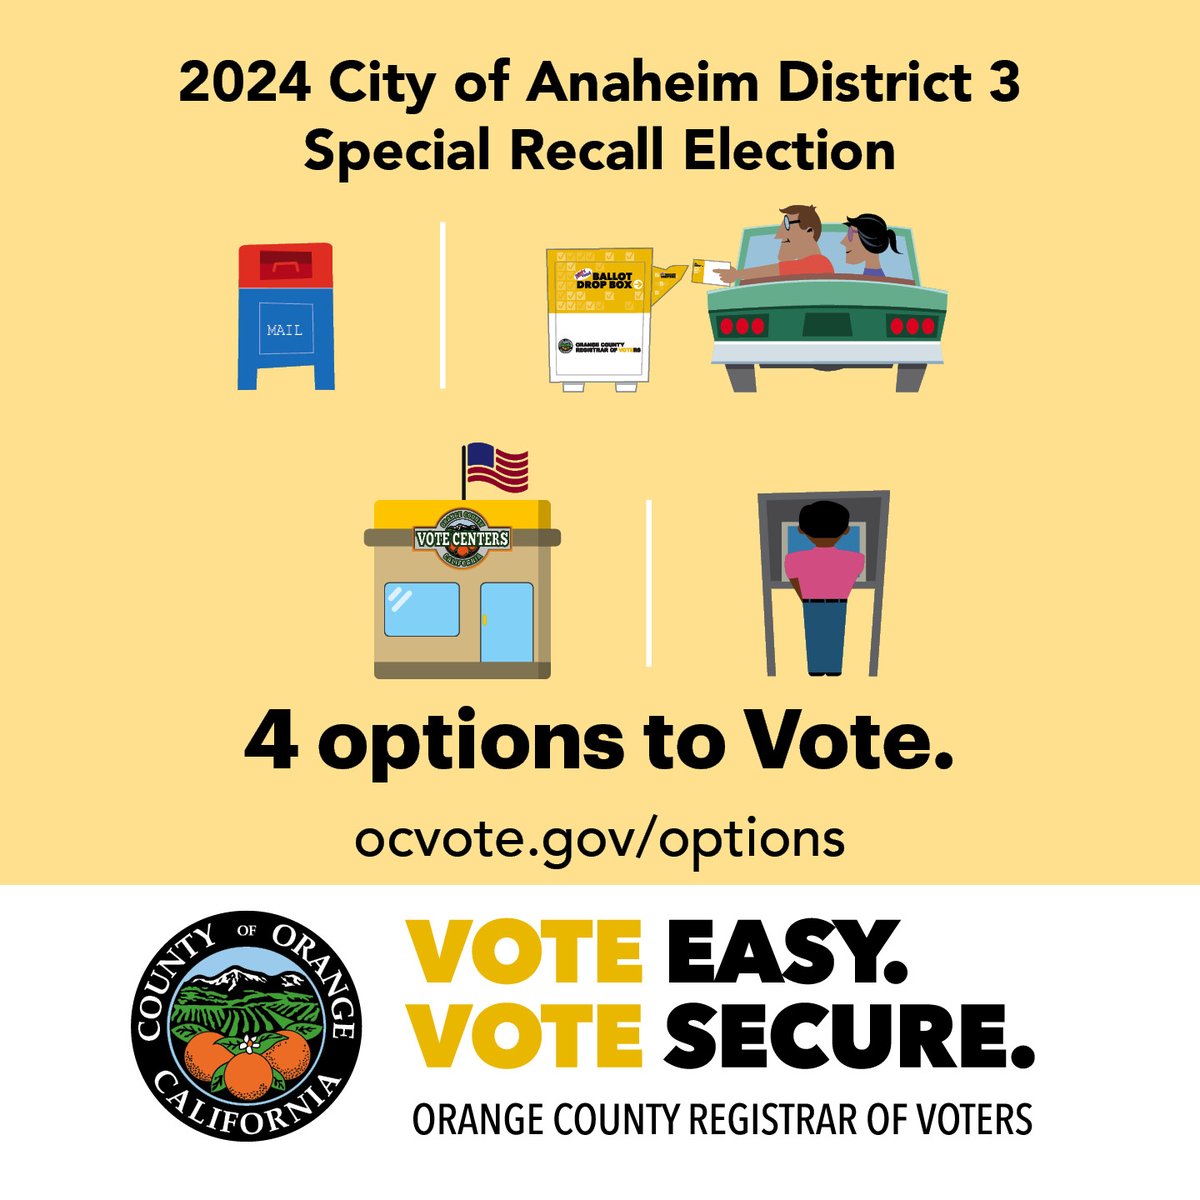 Ballots were mailed to all active registered voters in Anaheim, District 3 earlier this week. For information about your ballot return options visit ocvote.gov/options #OCVote #VoteEasyVoteSecure